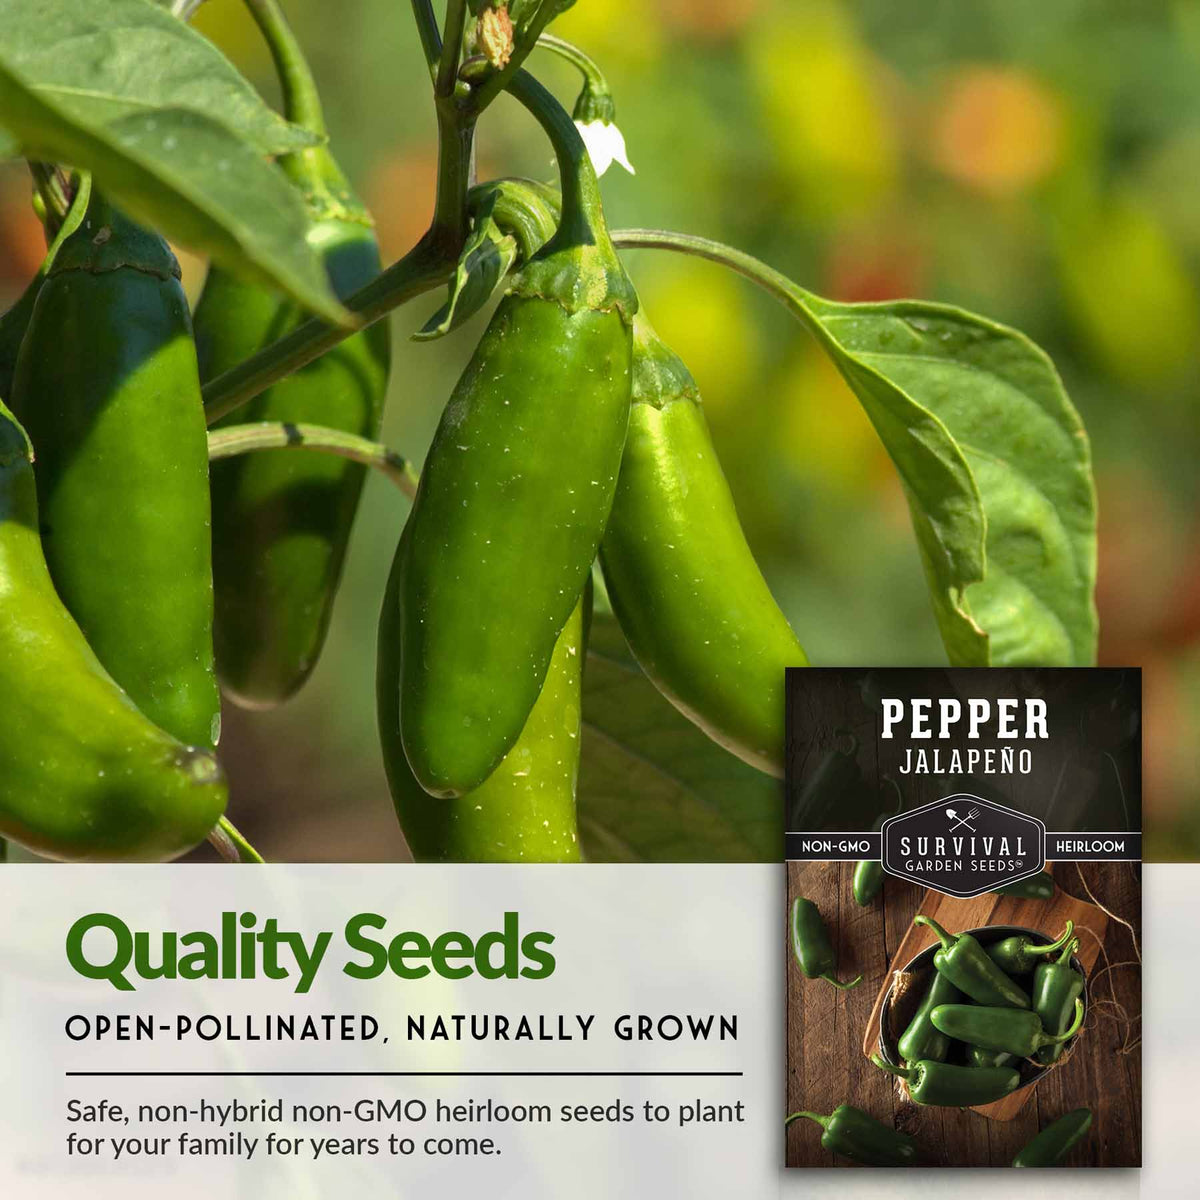 Quality seeds open-pollinated, naturally grown